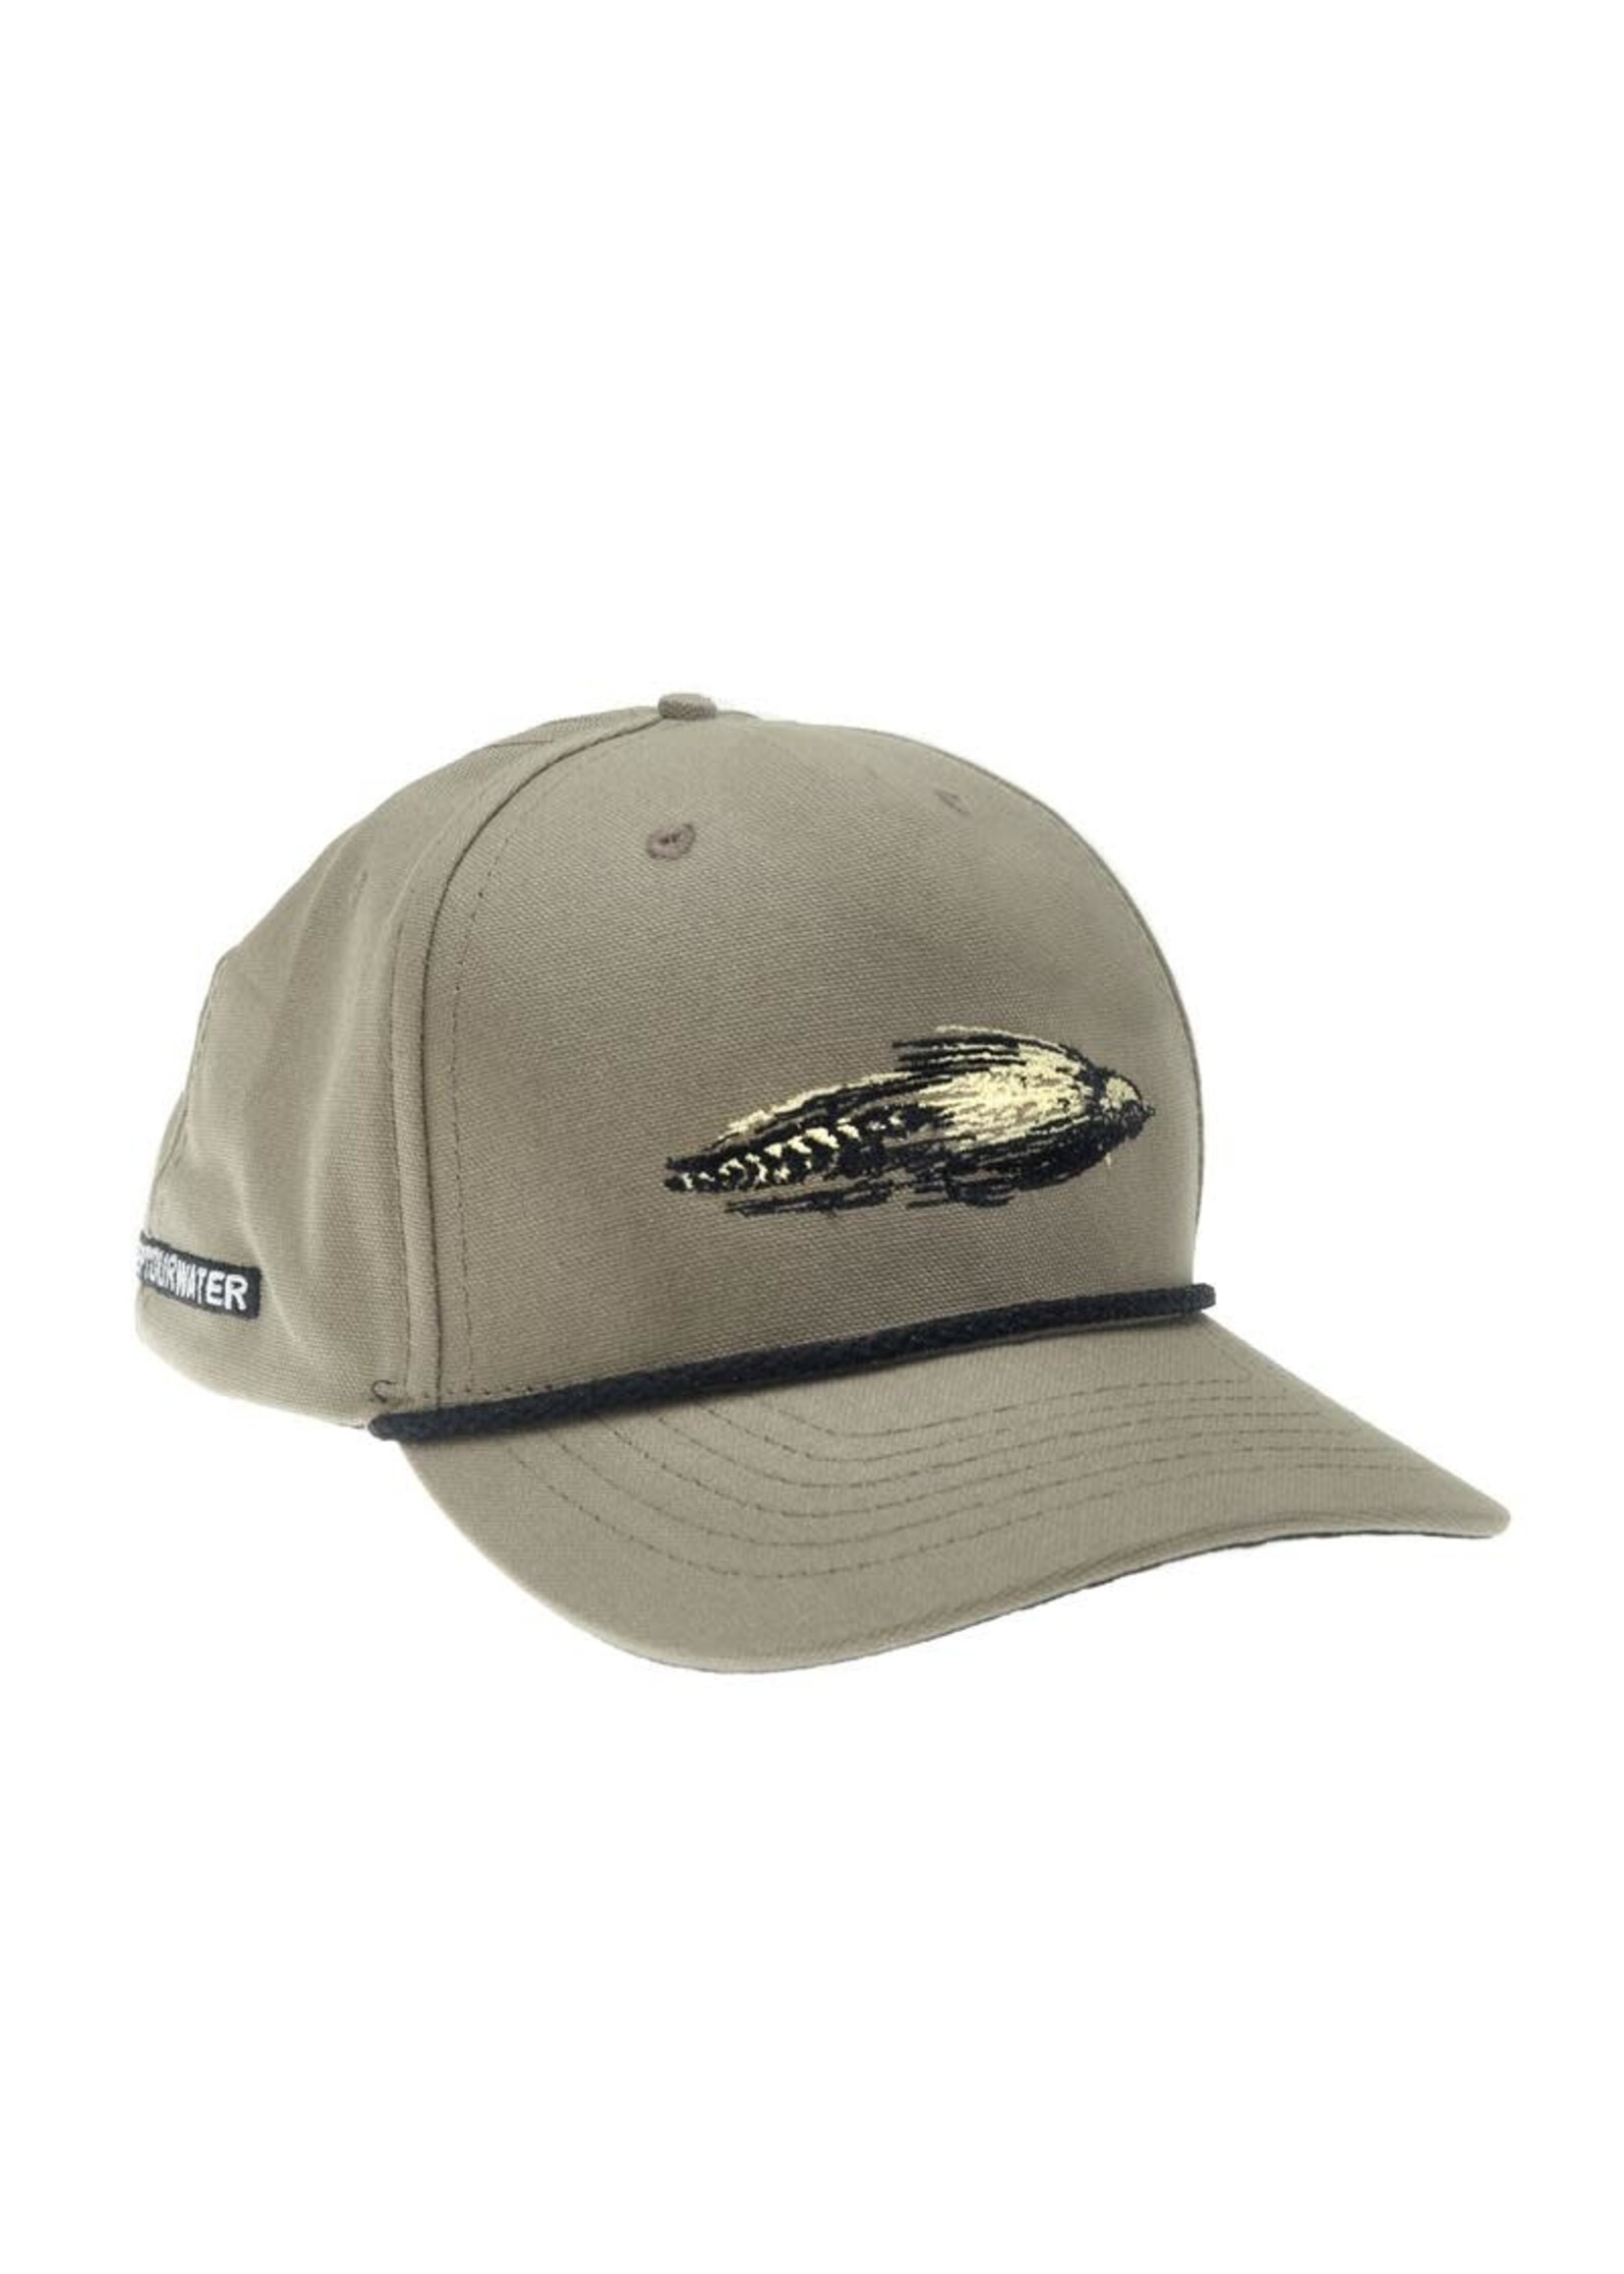 Rep Your Water Rep Your Water Big Streamer Hat